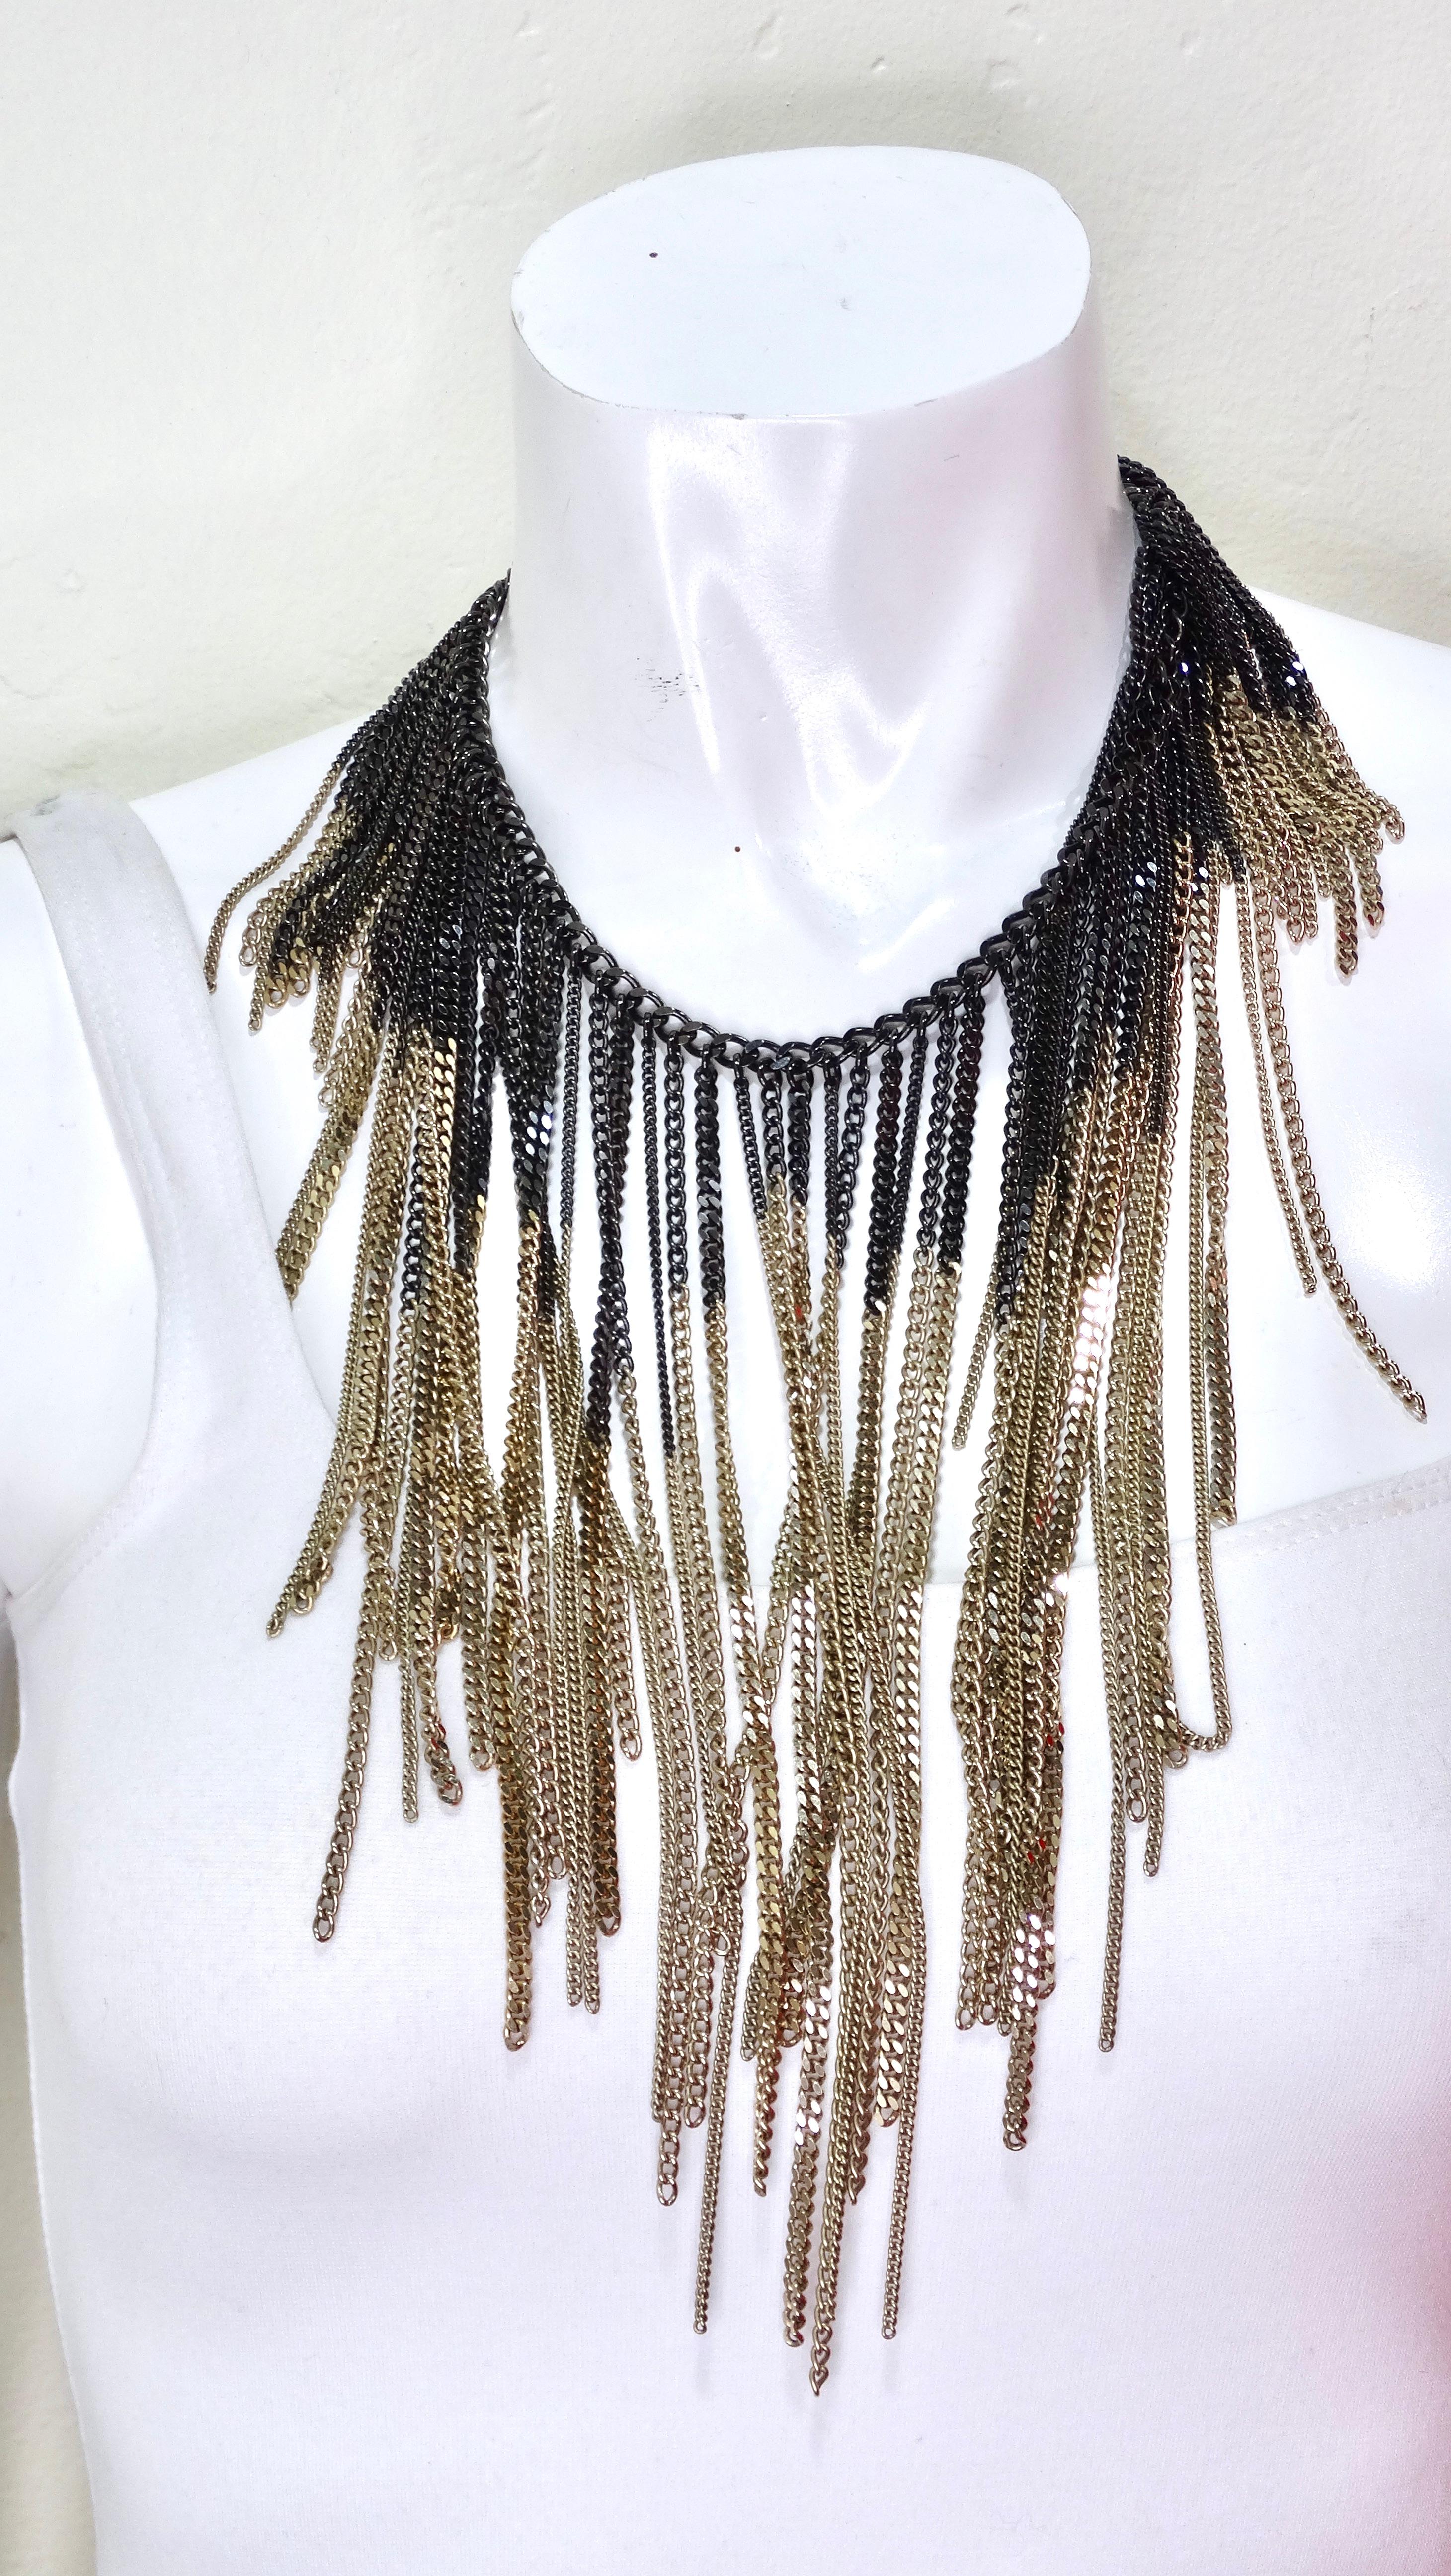 CHANEL Ombrè Chain Fringe Collar Necklace In Excellent Condition For Sale In Scottsdale, AZ